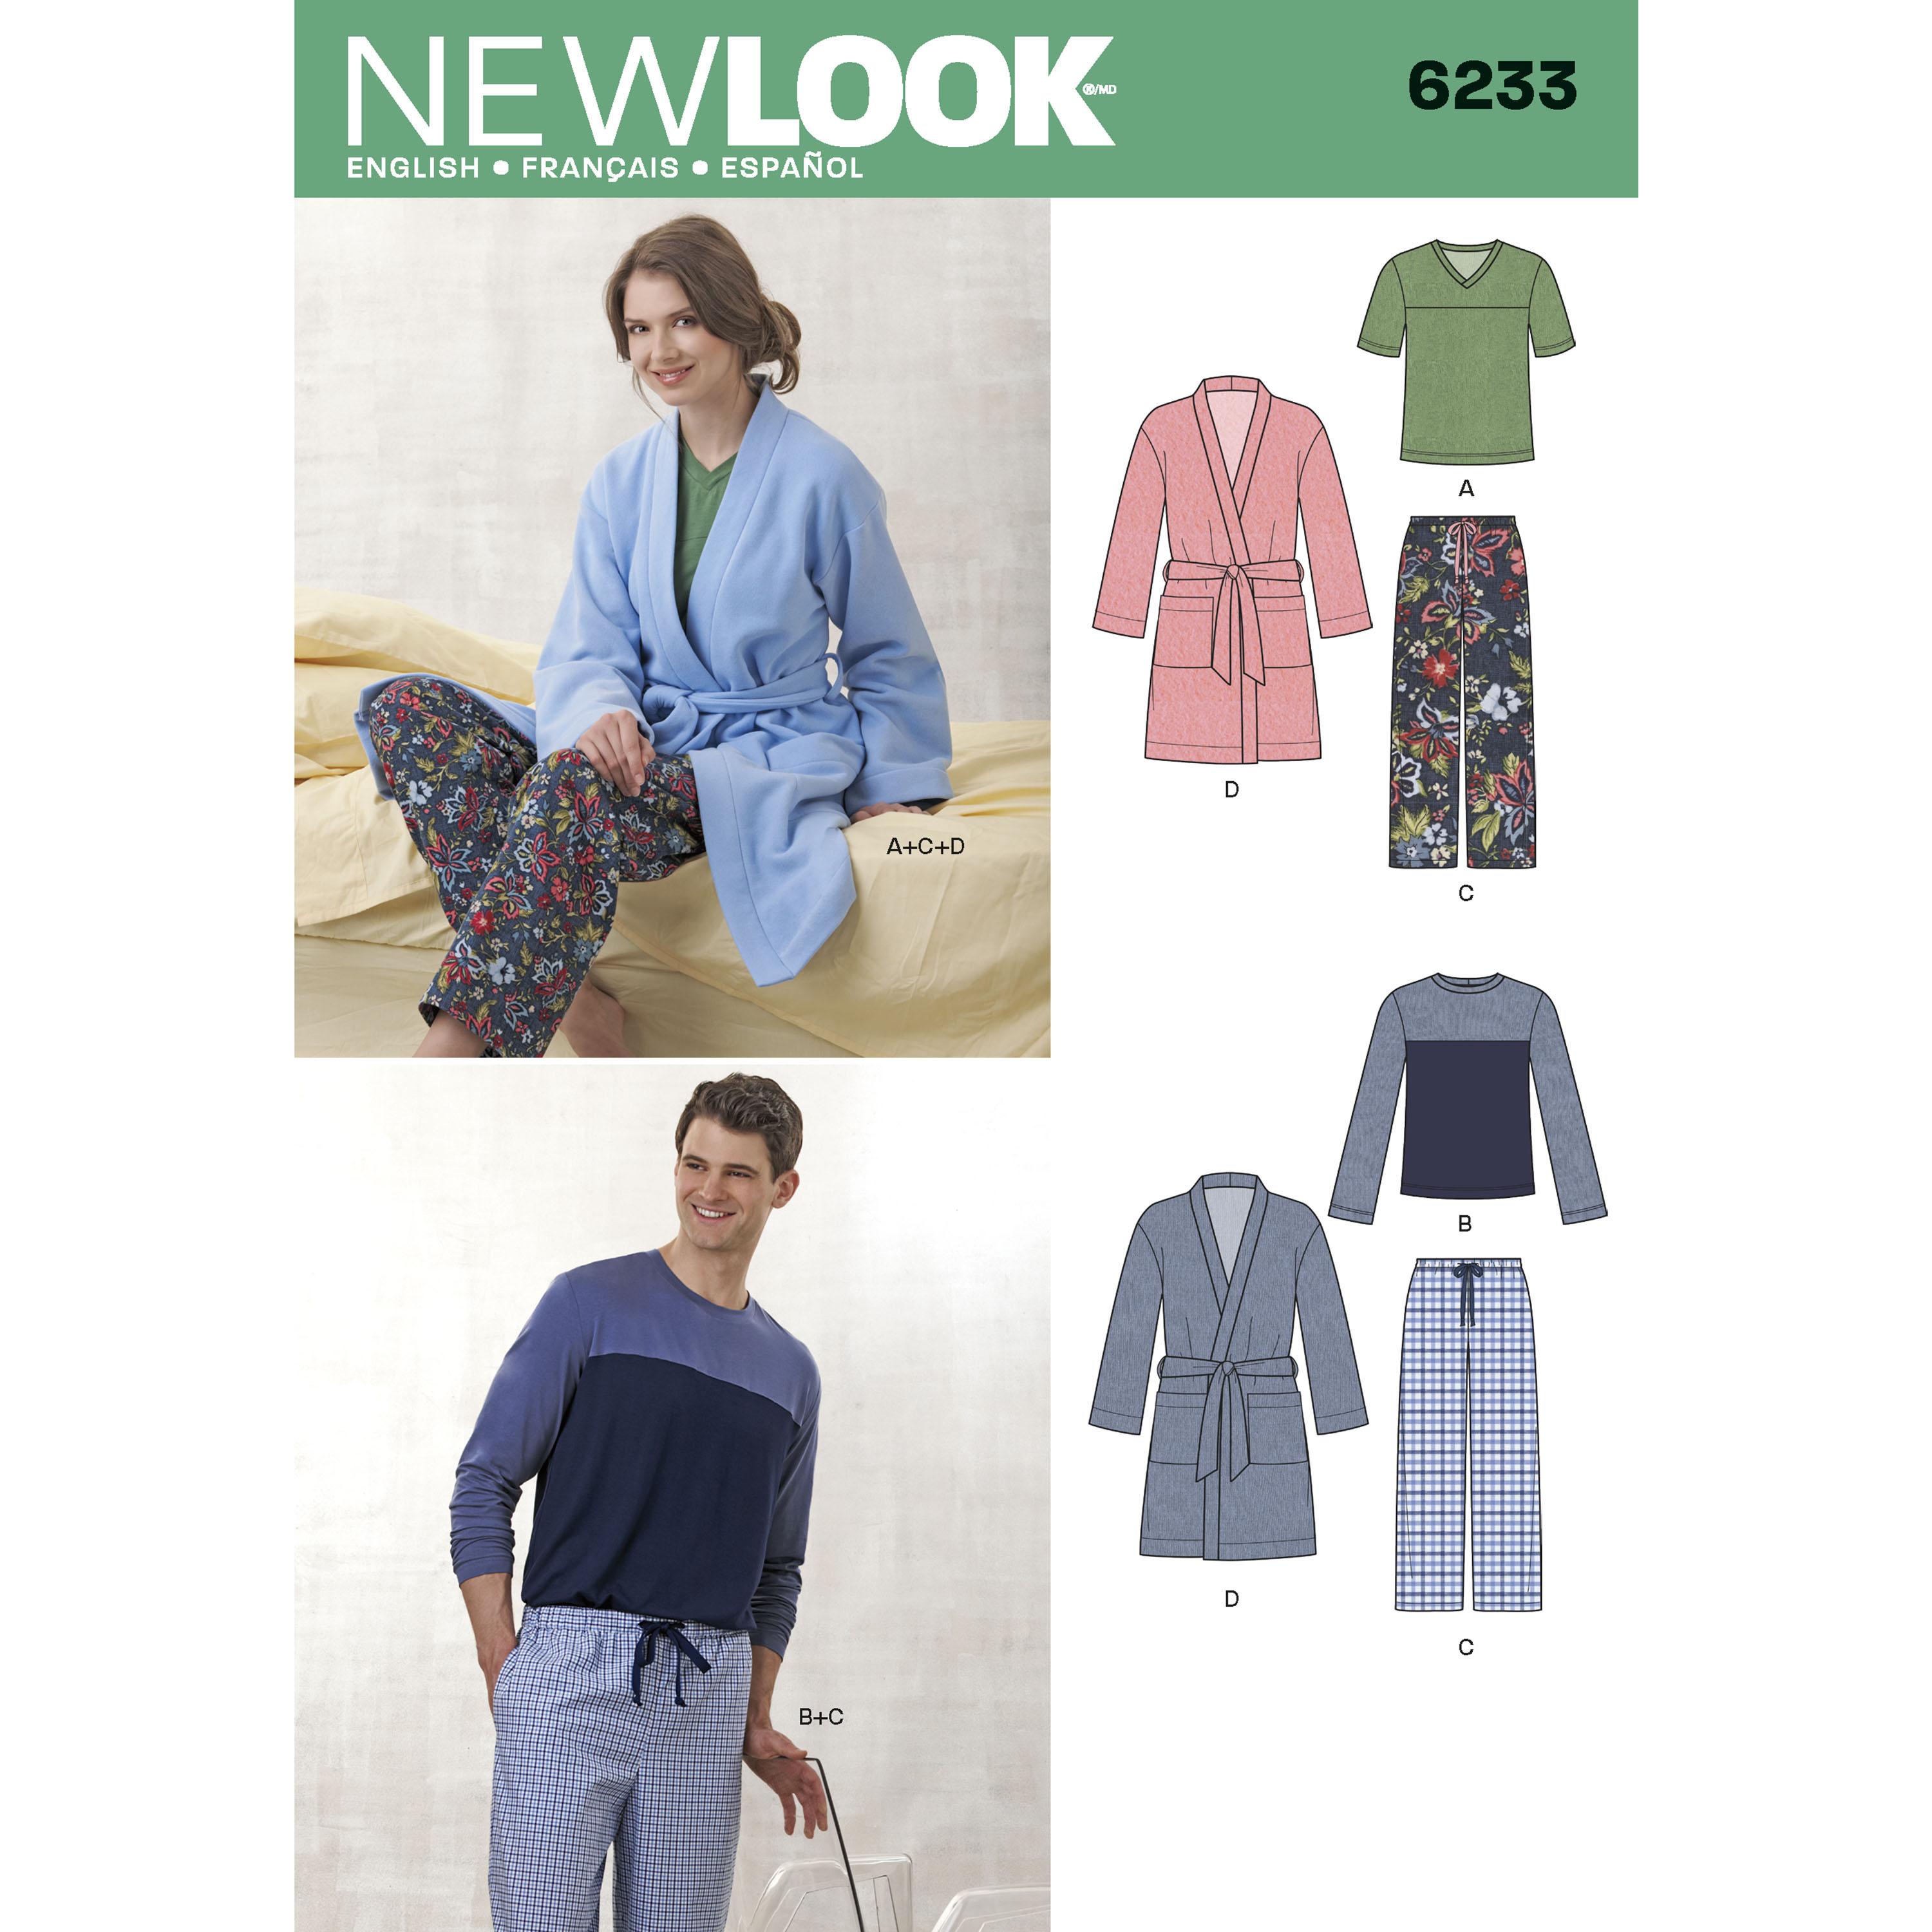 NewLook N6233 Unisex Pants, Robe and Knit Tops